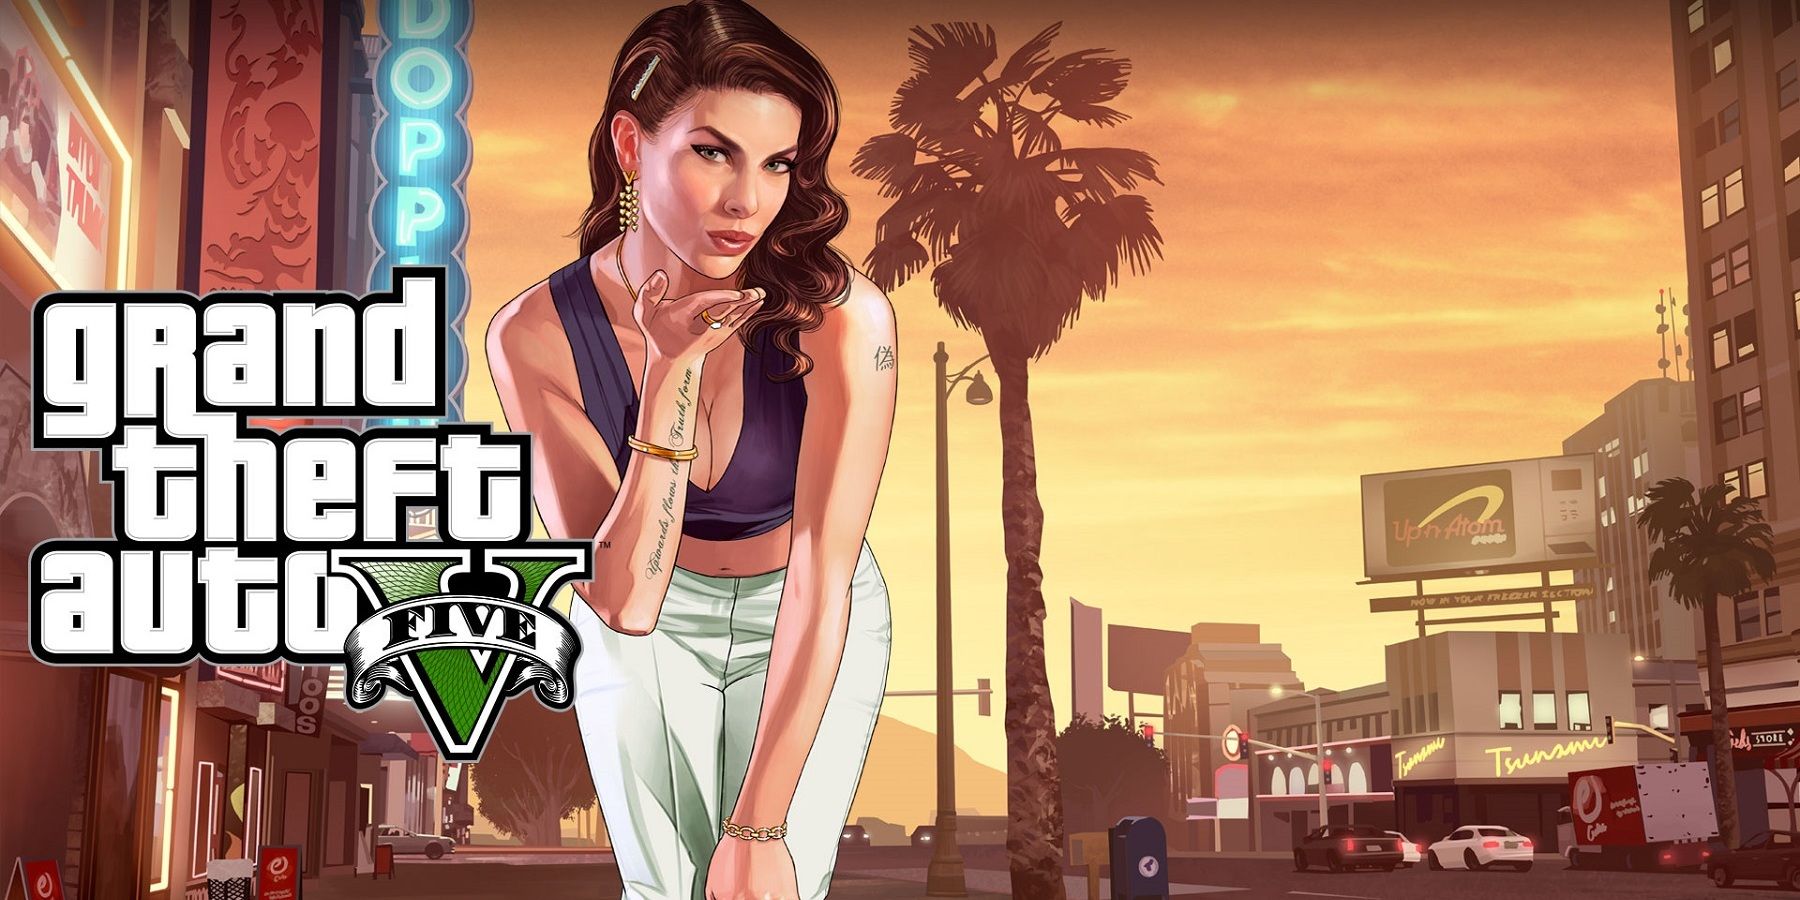 Huge GTA 5 mod adds new story where you can literally talk to NPCs